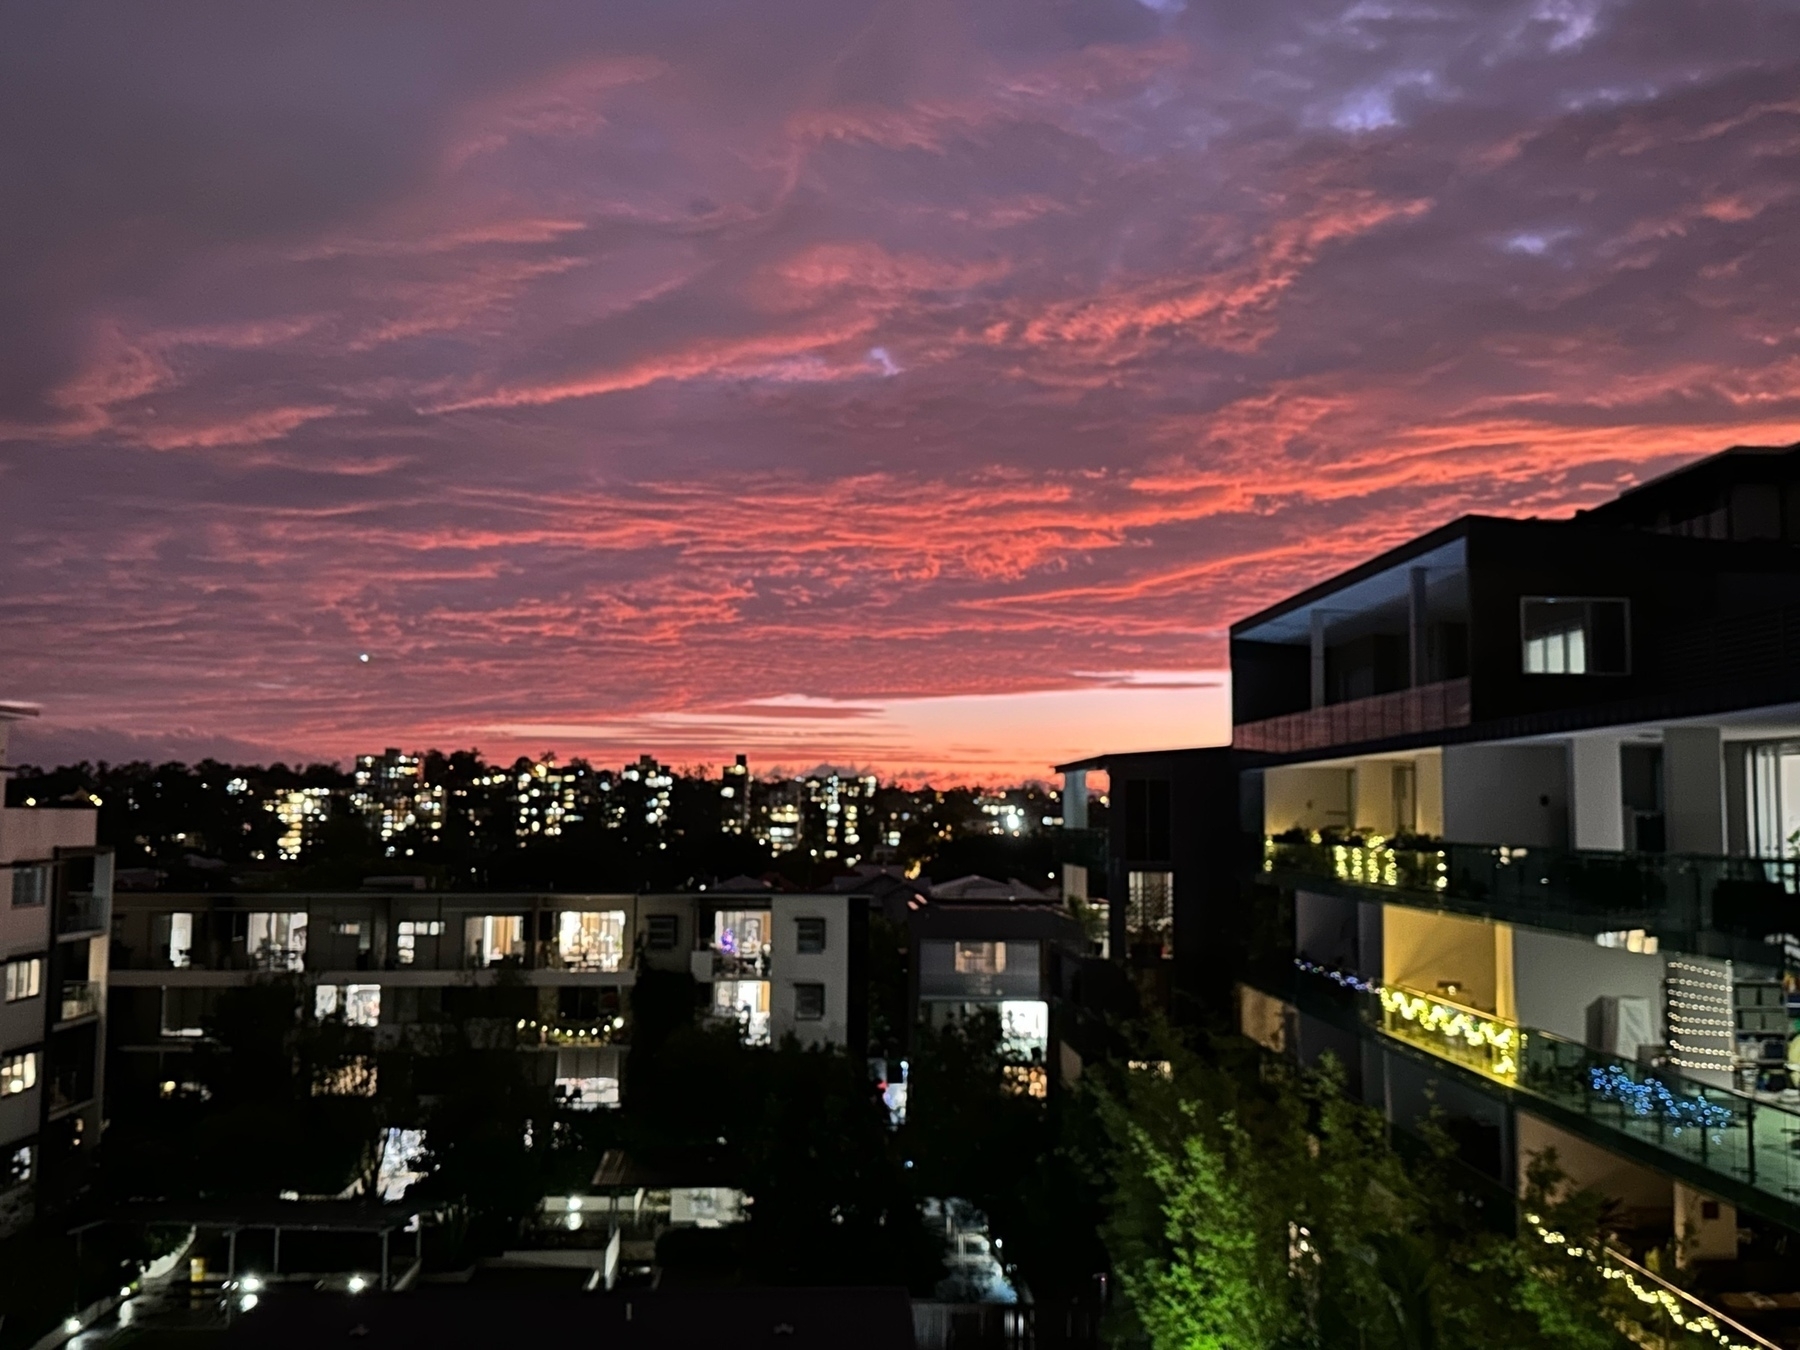 A view from an apartment balcony over some low buildings, another apartment building to the right. The sky is full of clouds that are a deep dark red, almost purple, colour.